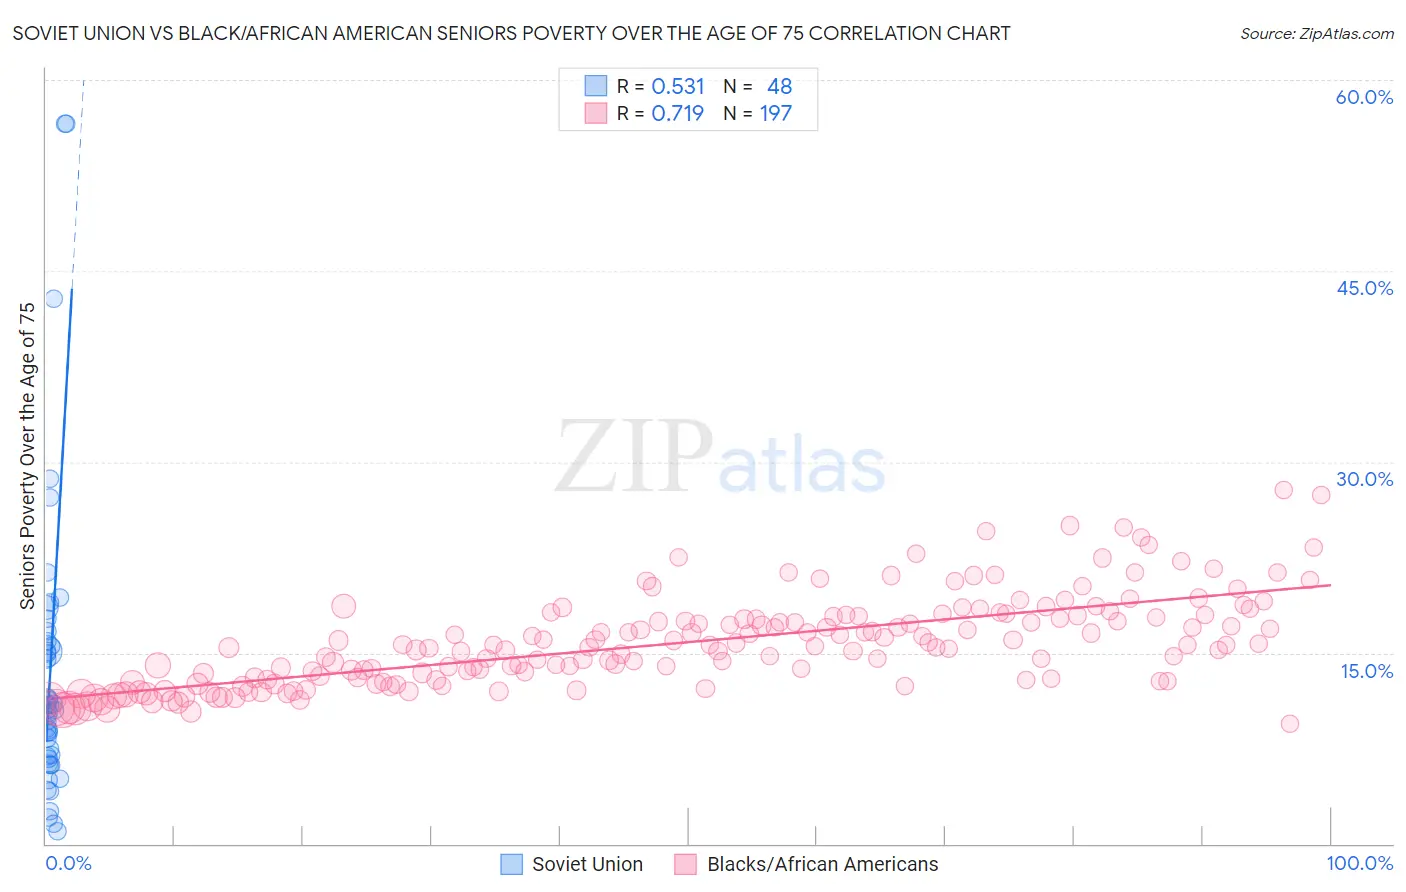 Soviet Union vs Black/African American Seniors Poverty Over the Age of 75